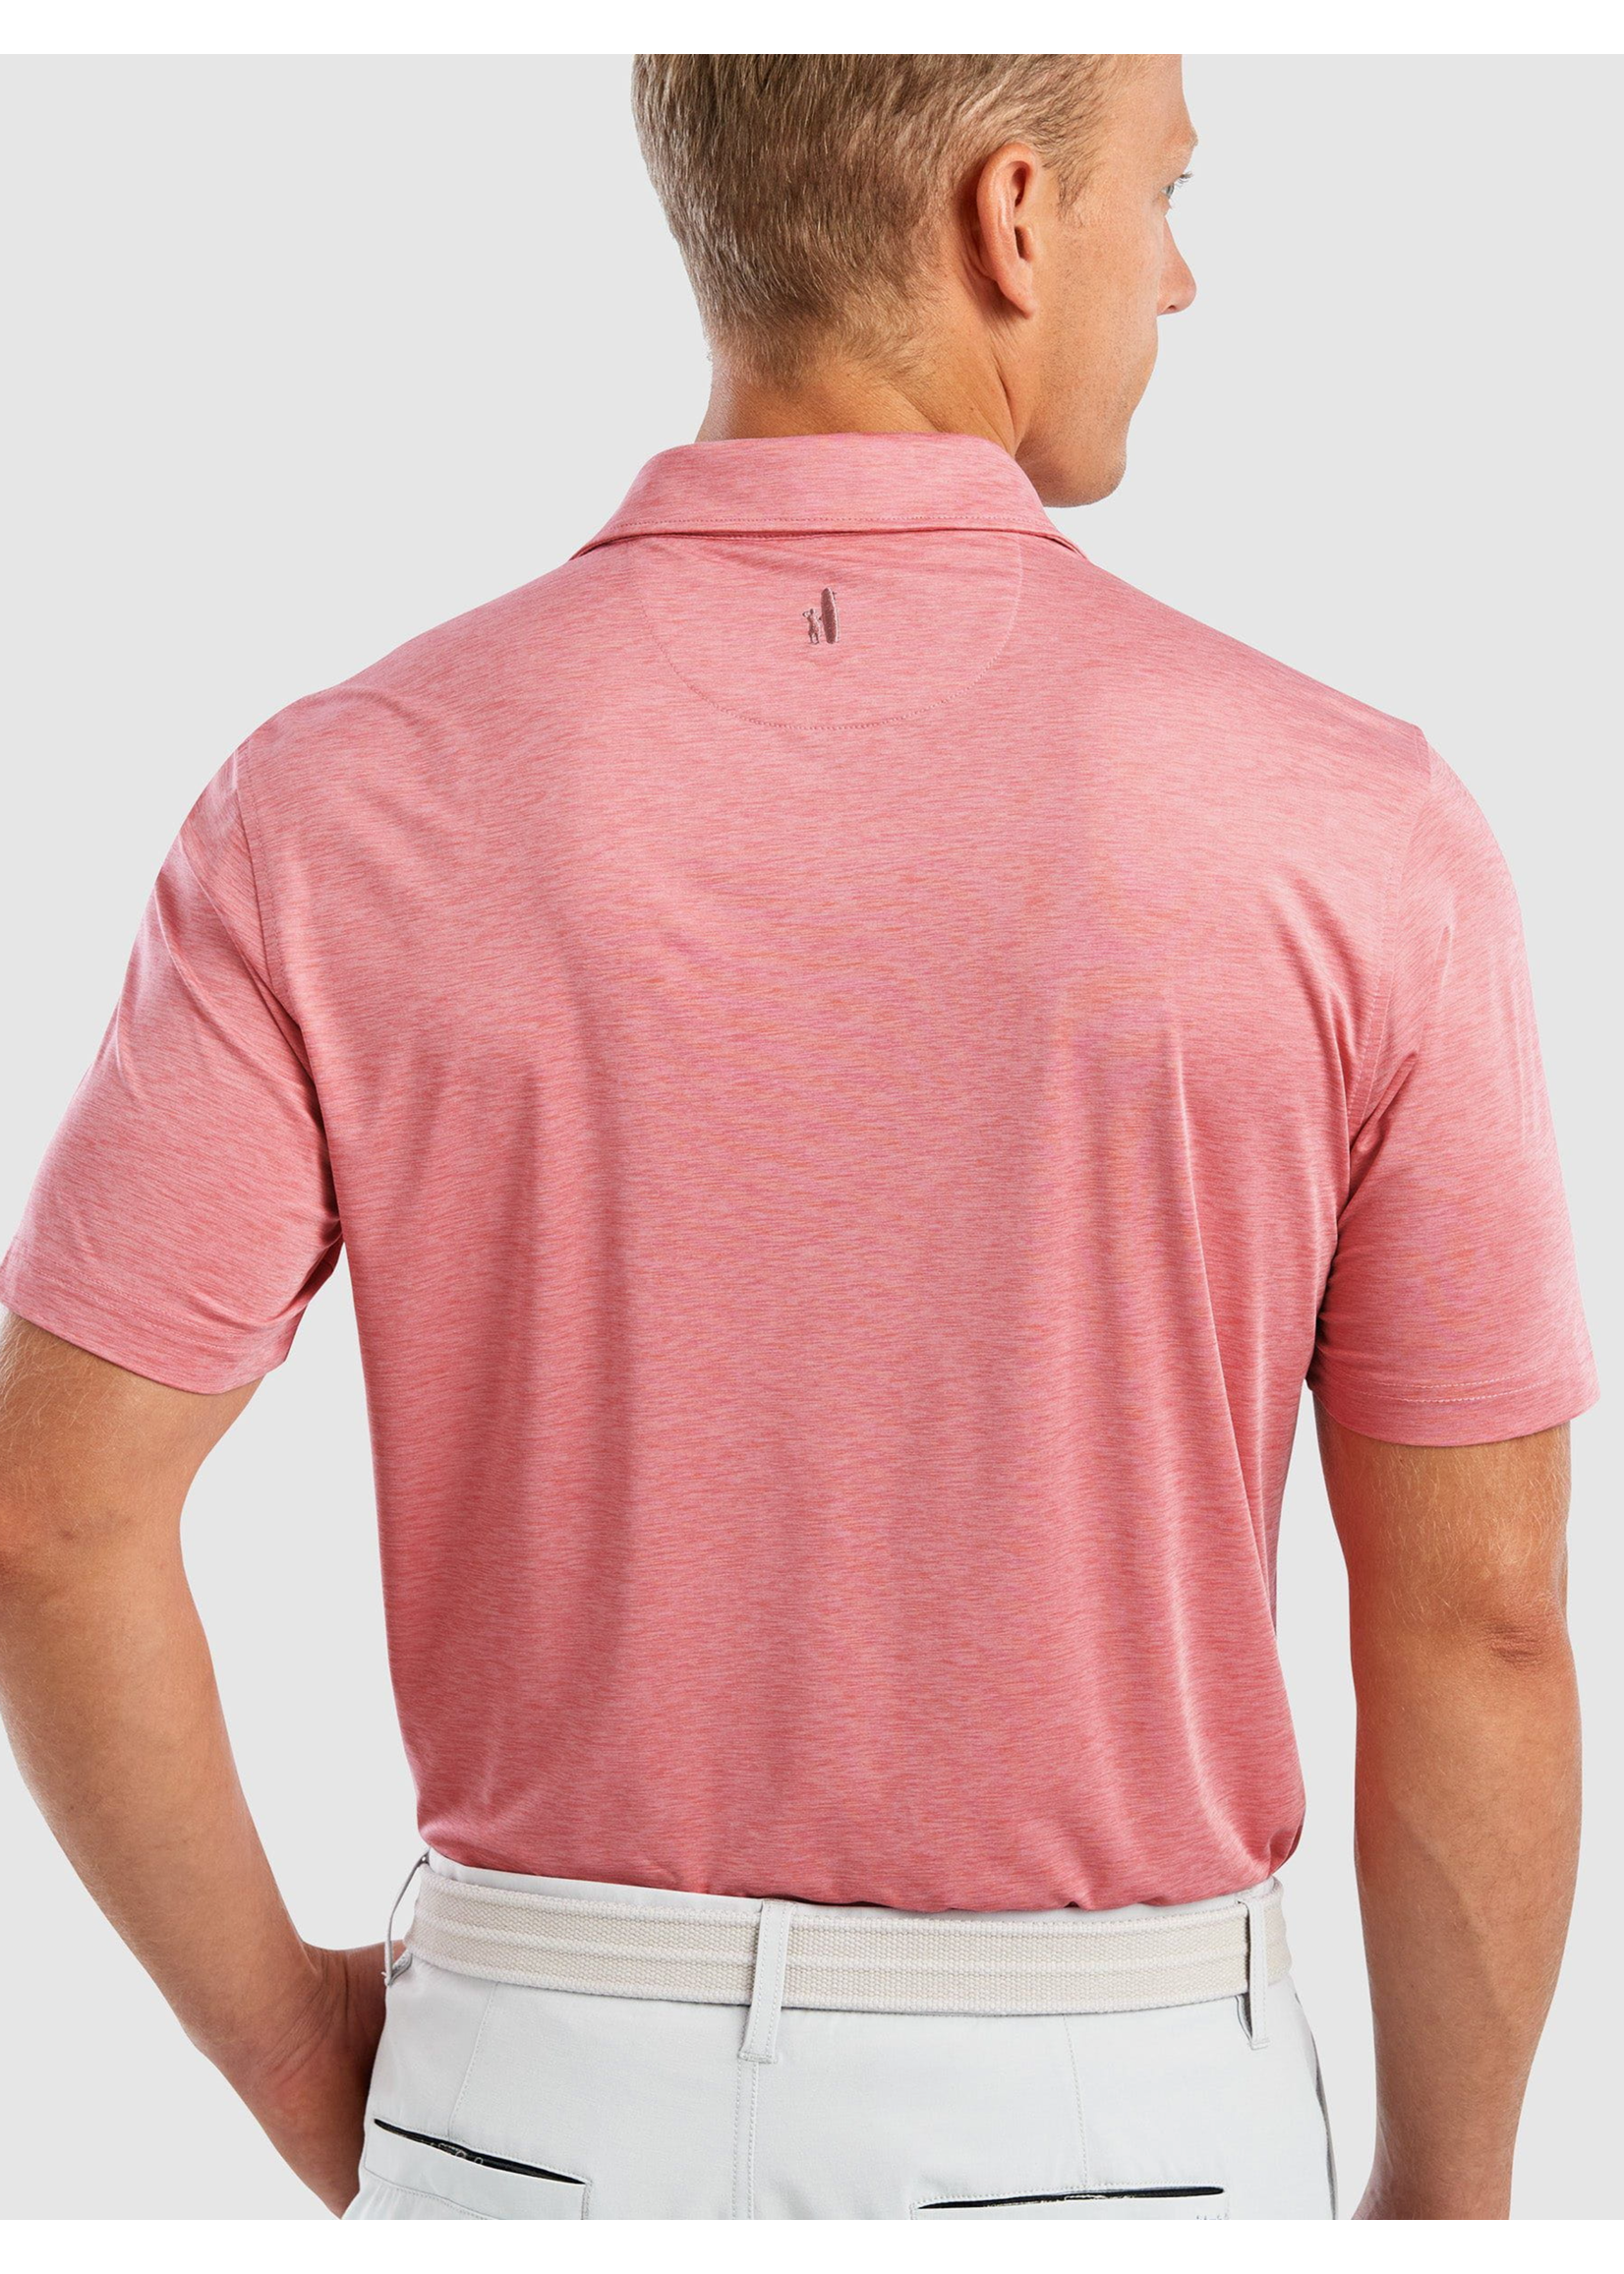 JOHNNIE-O Huron Ultra-Soft Featherweight Performance Polo (Multiple Colors) JMPO4690